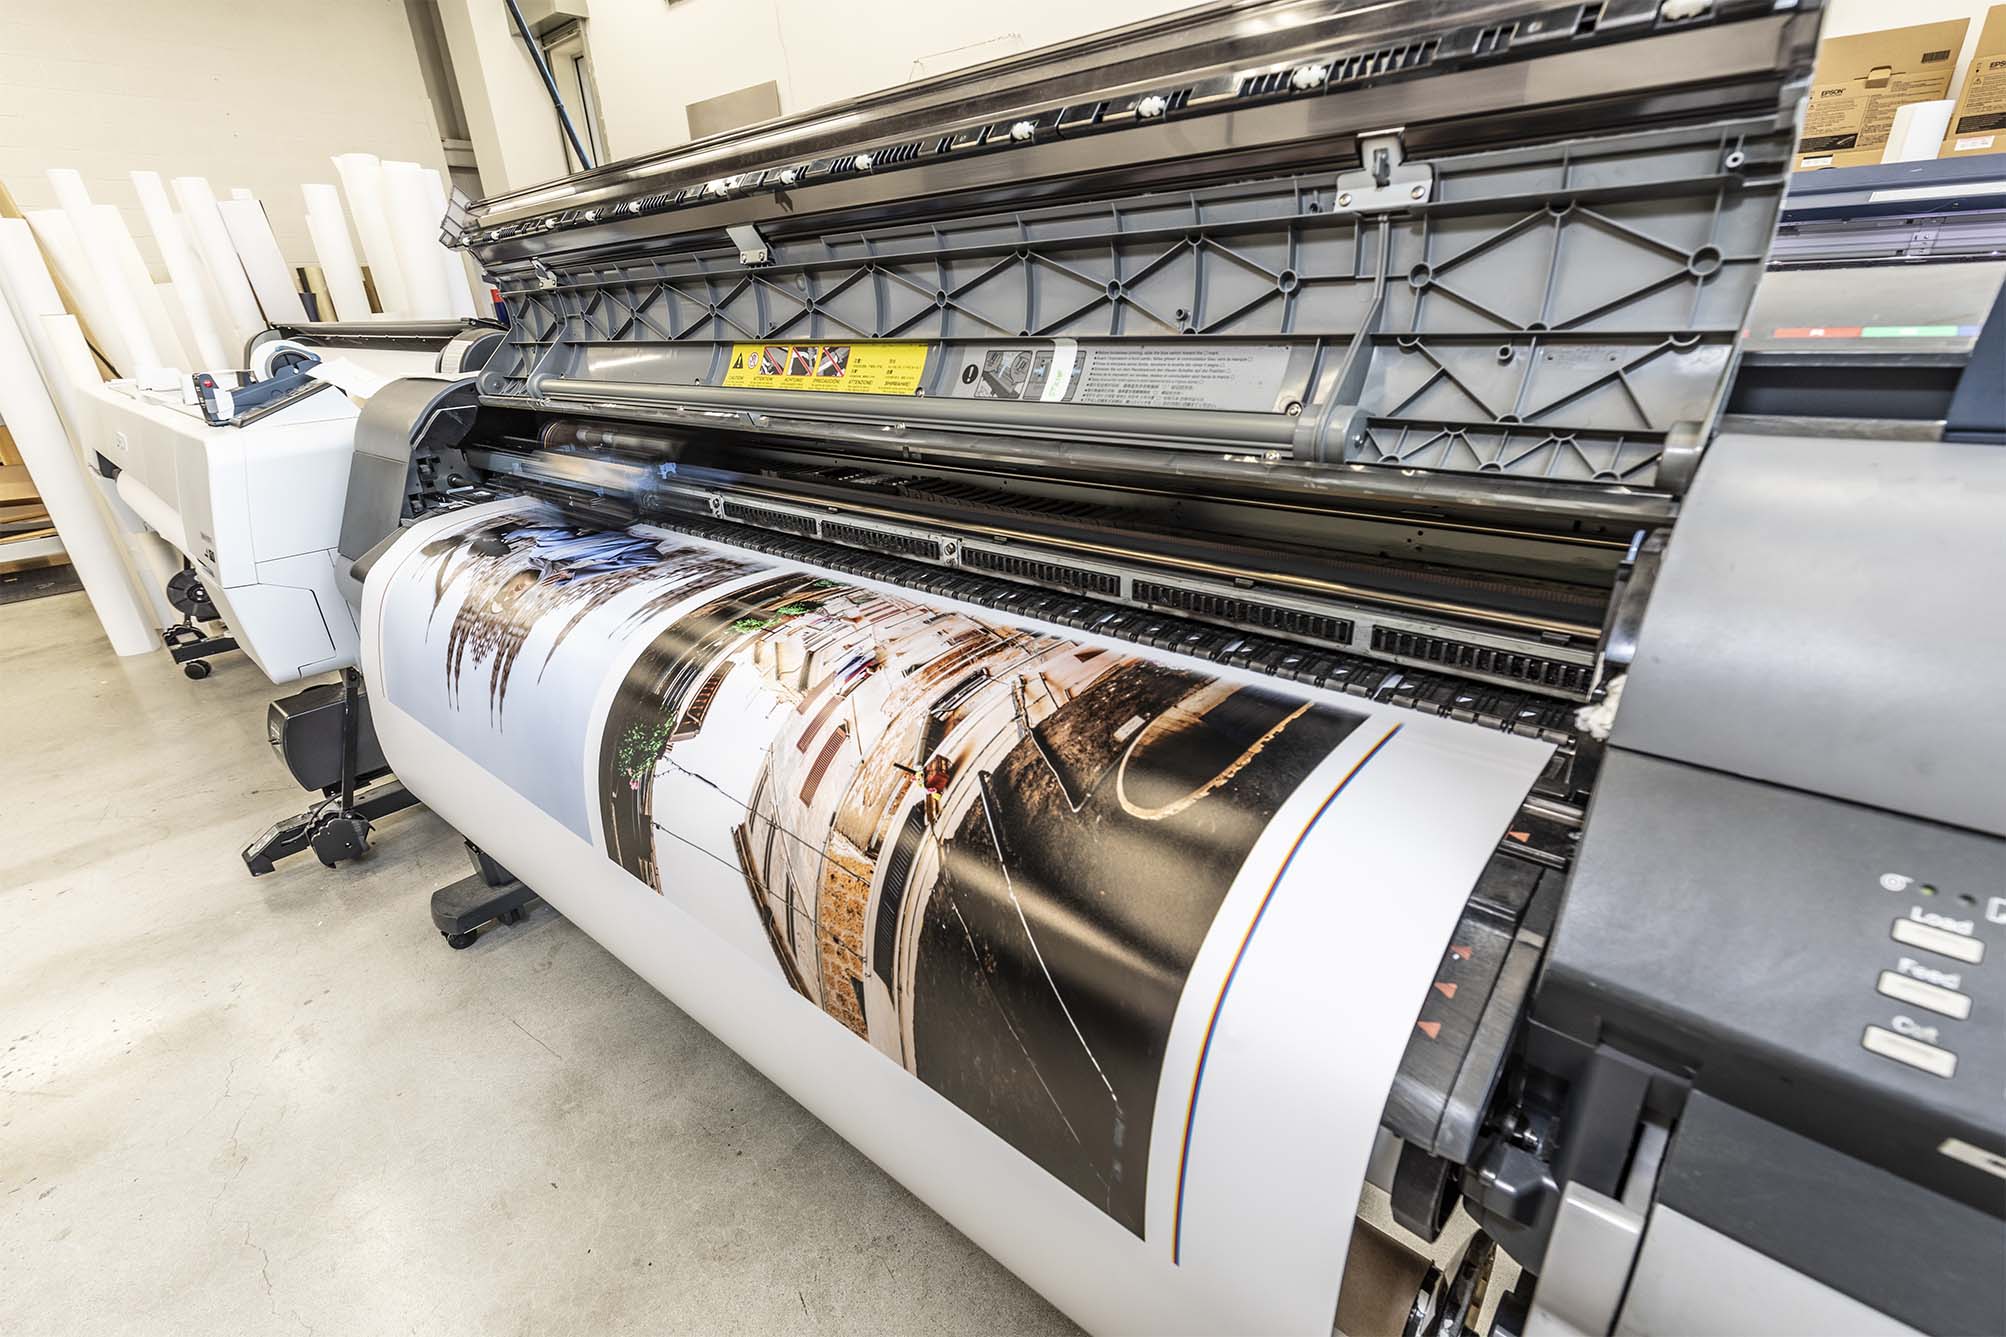 Choosing the Best Fine Art Paper for Your Print